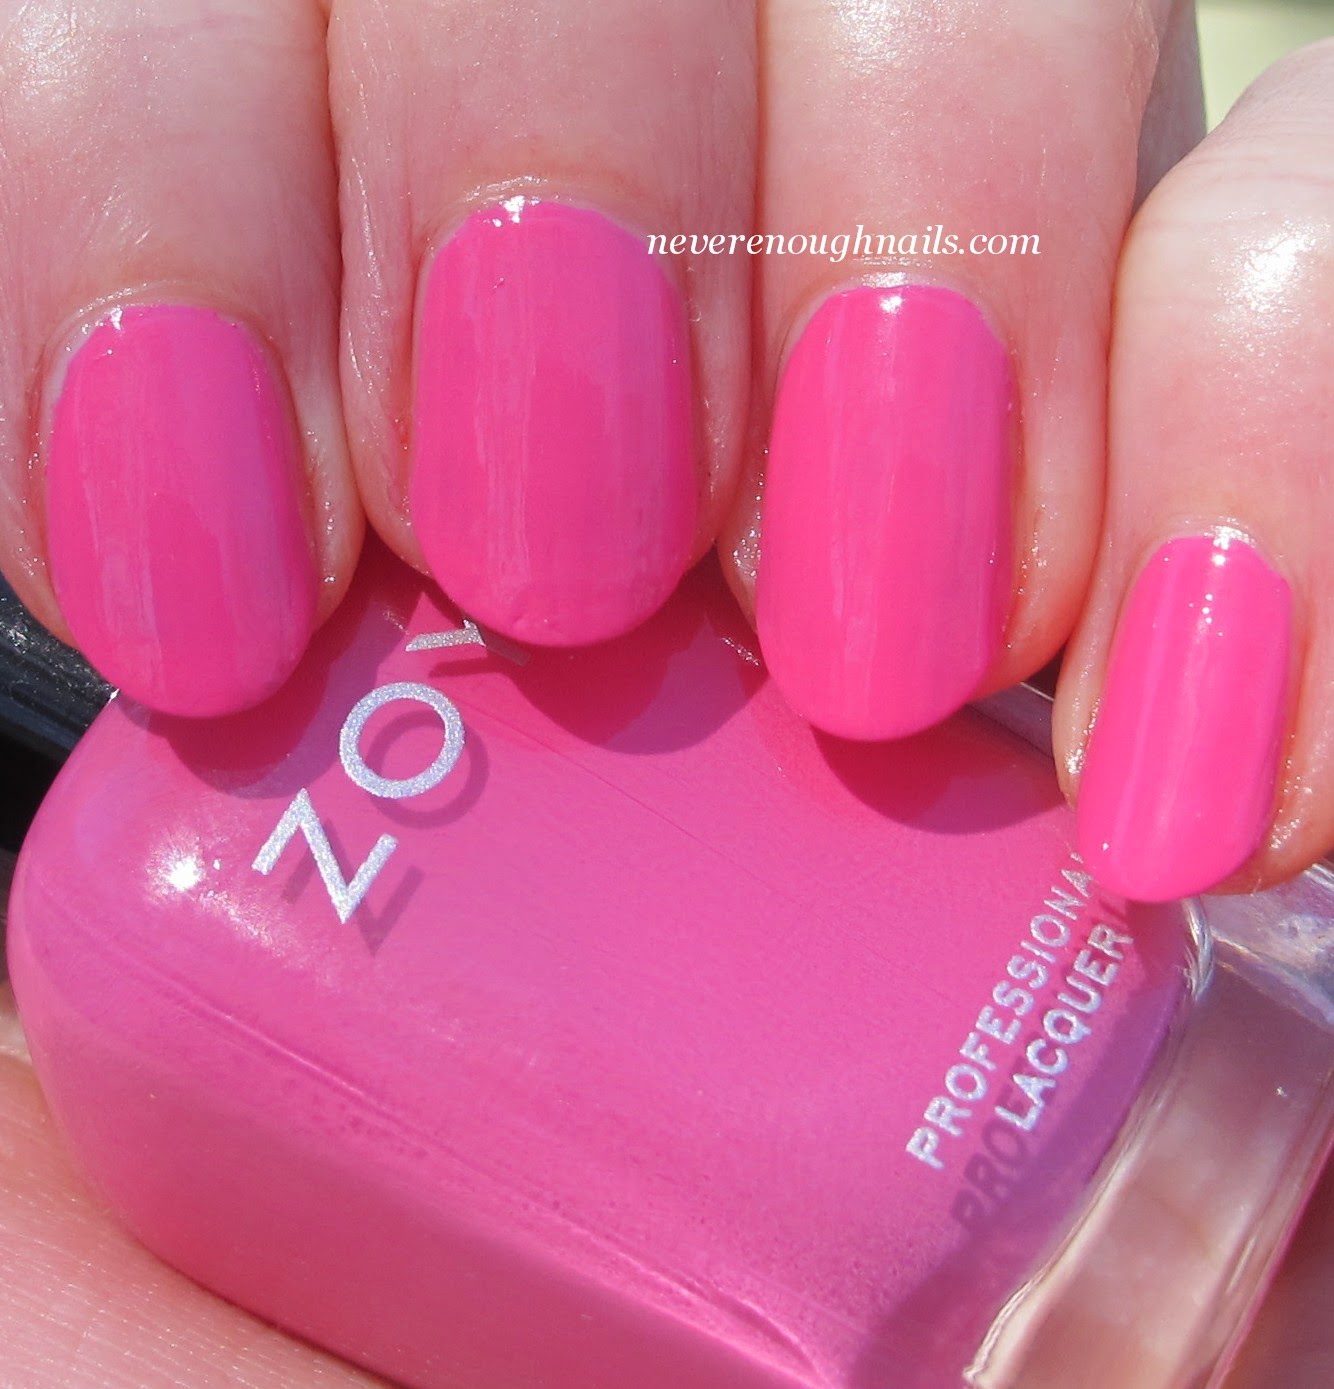 Zoya Nail Polish Safe Enough For Little Hands To Use -